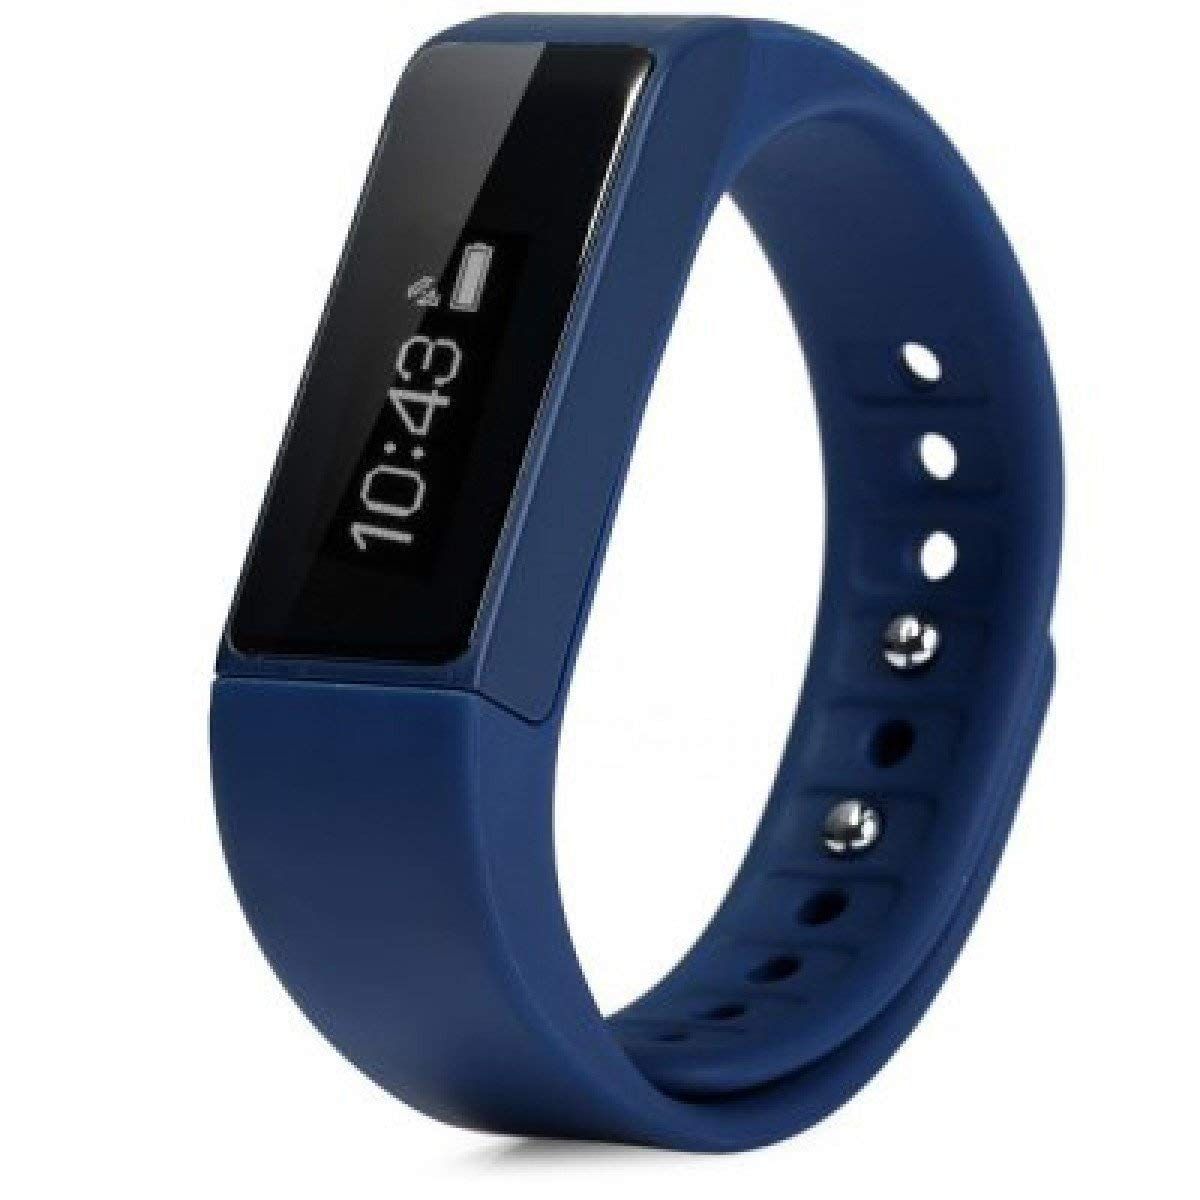 Enhance Smart i5 Plus Fitness Band Price in India 2023, Full Specs